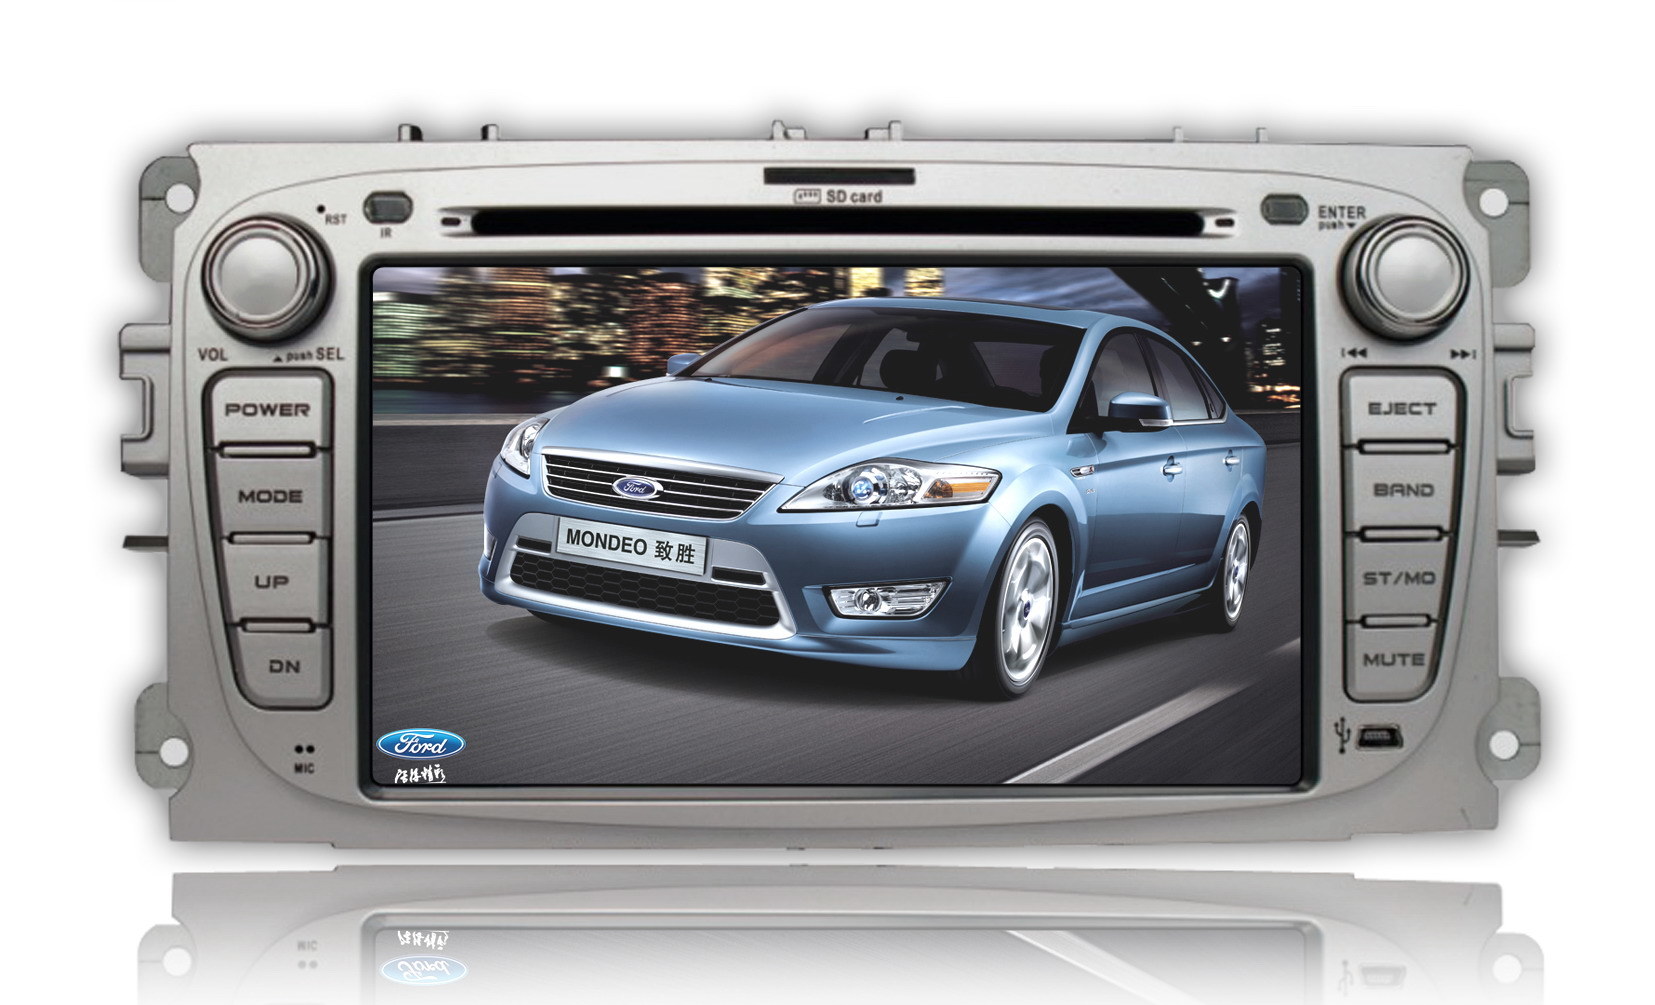 7 Inch Digital HD Touch Screen Car DVD with GPS for New Ford Focus/ Mondeo/ C-Max (TS7163)